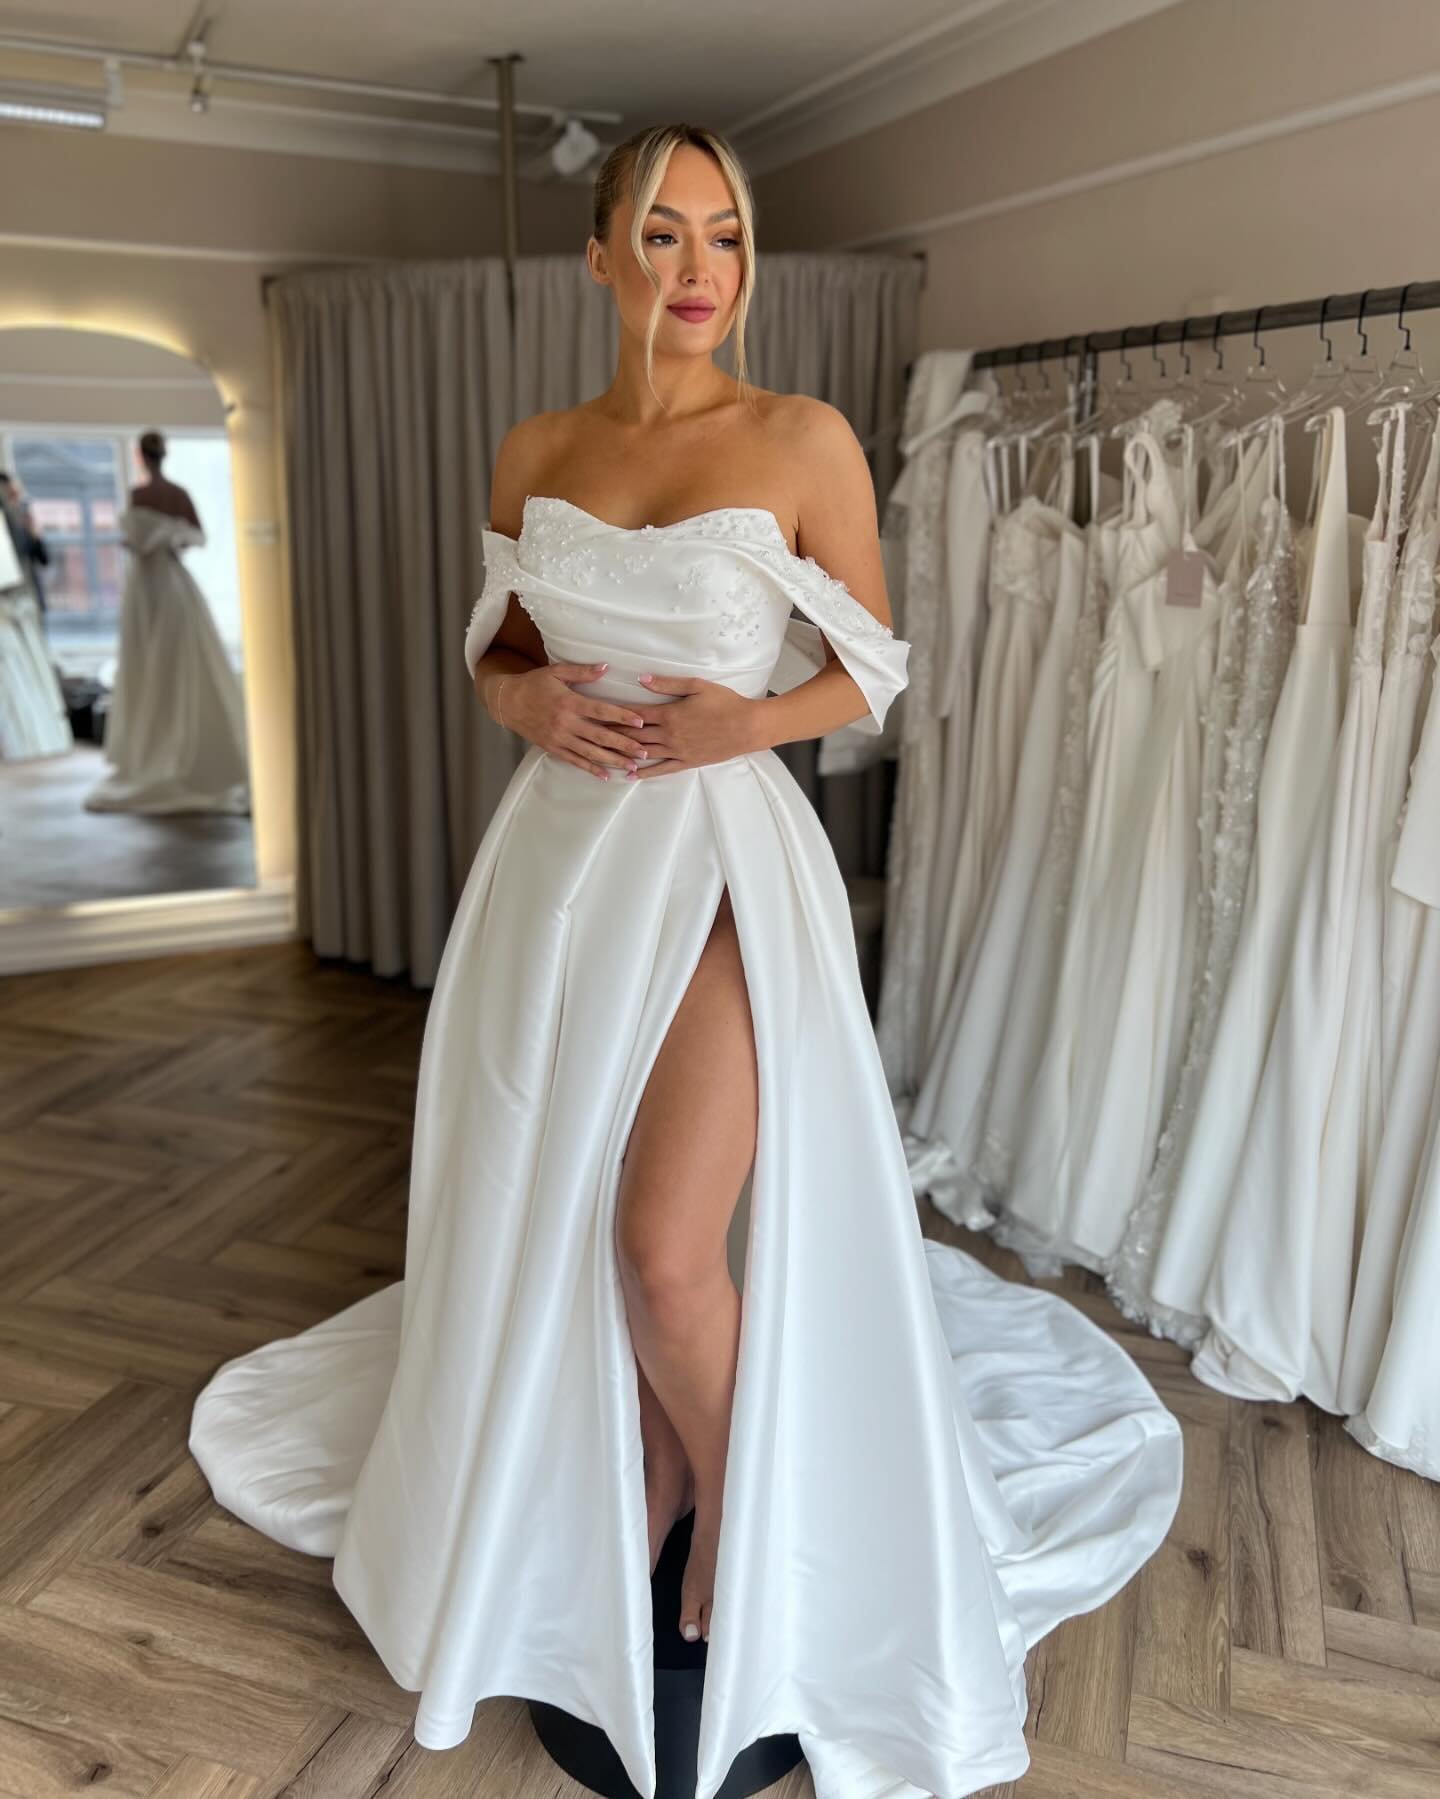 N E W &bull; D R E S S ✨ girls, meet &lsquo;exquisite&rsquo; 🤍 elegant pearls scattered across her off-the-shoulder neckline. Beautifully structured bodice and pleated skirt with a thigh high slit😍
Swoon ✨
&bull;
&bull;
&bull;
#modernbride #pearlwe